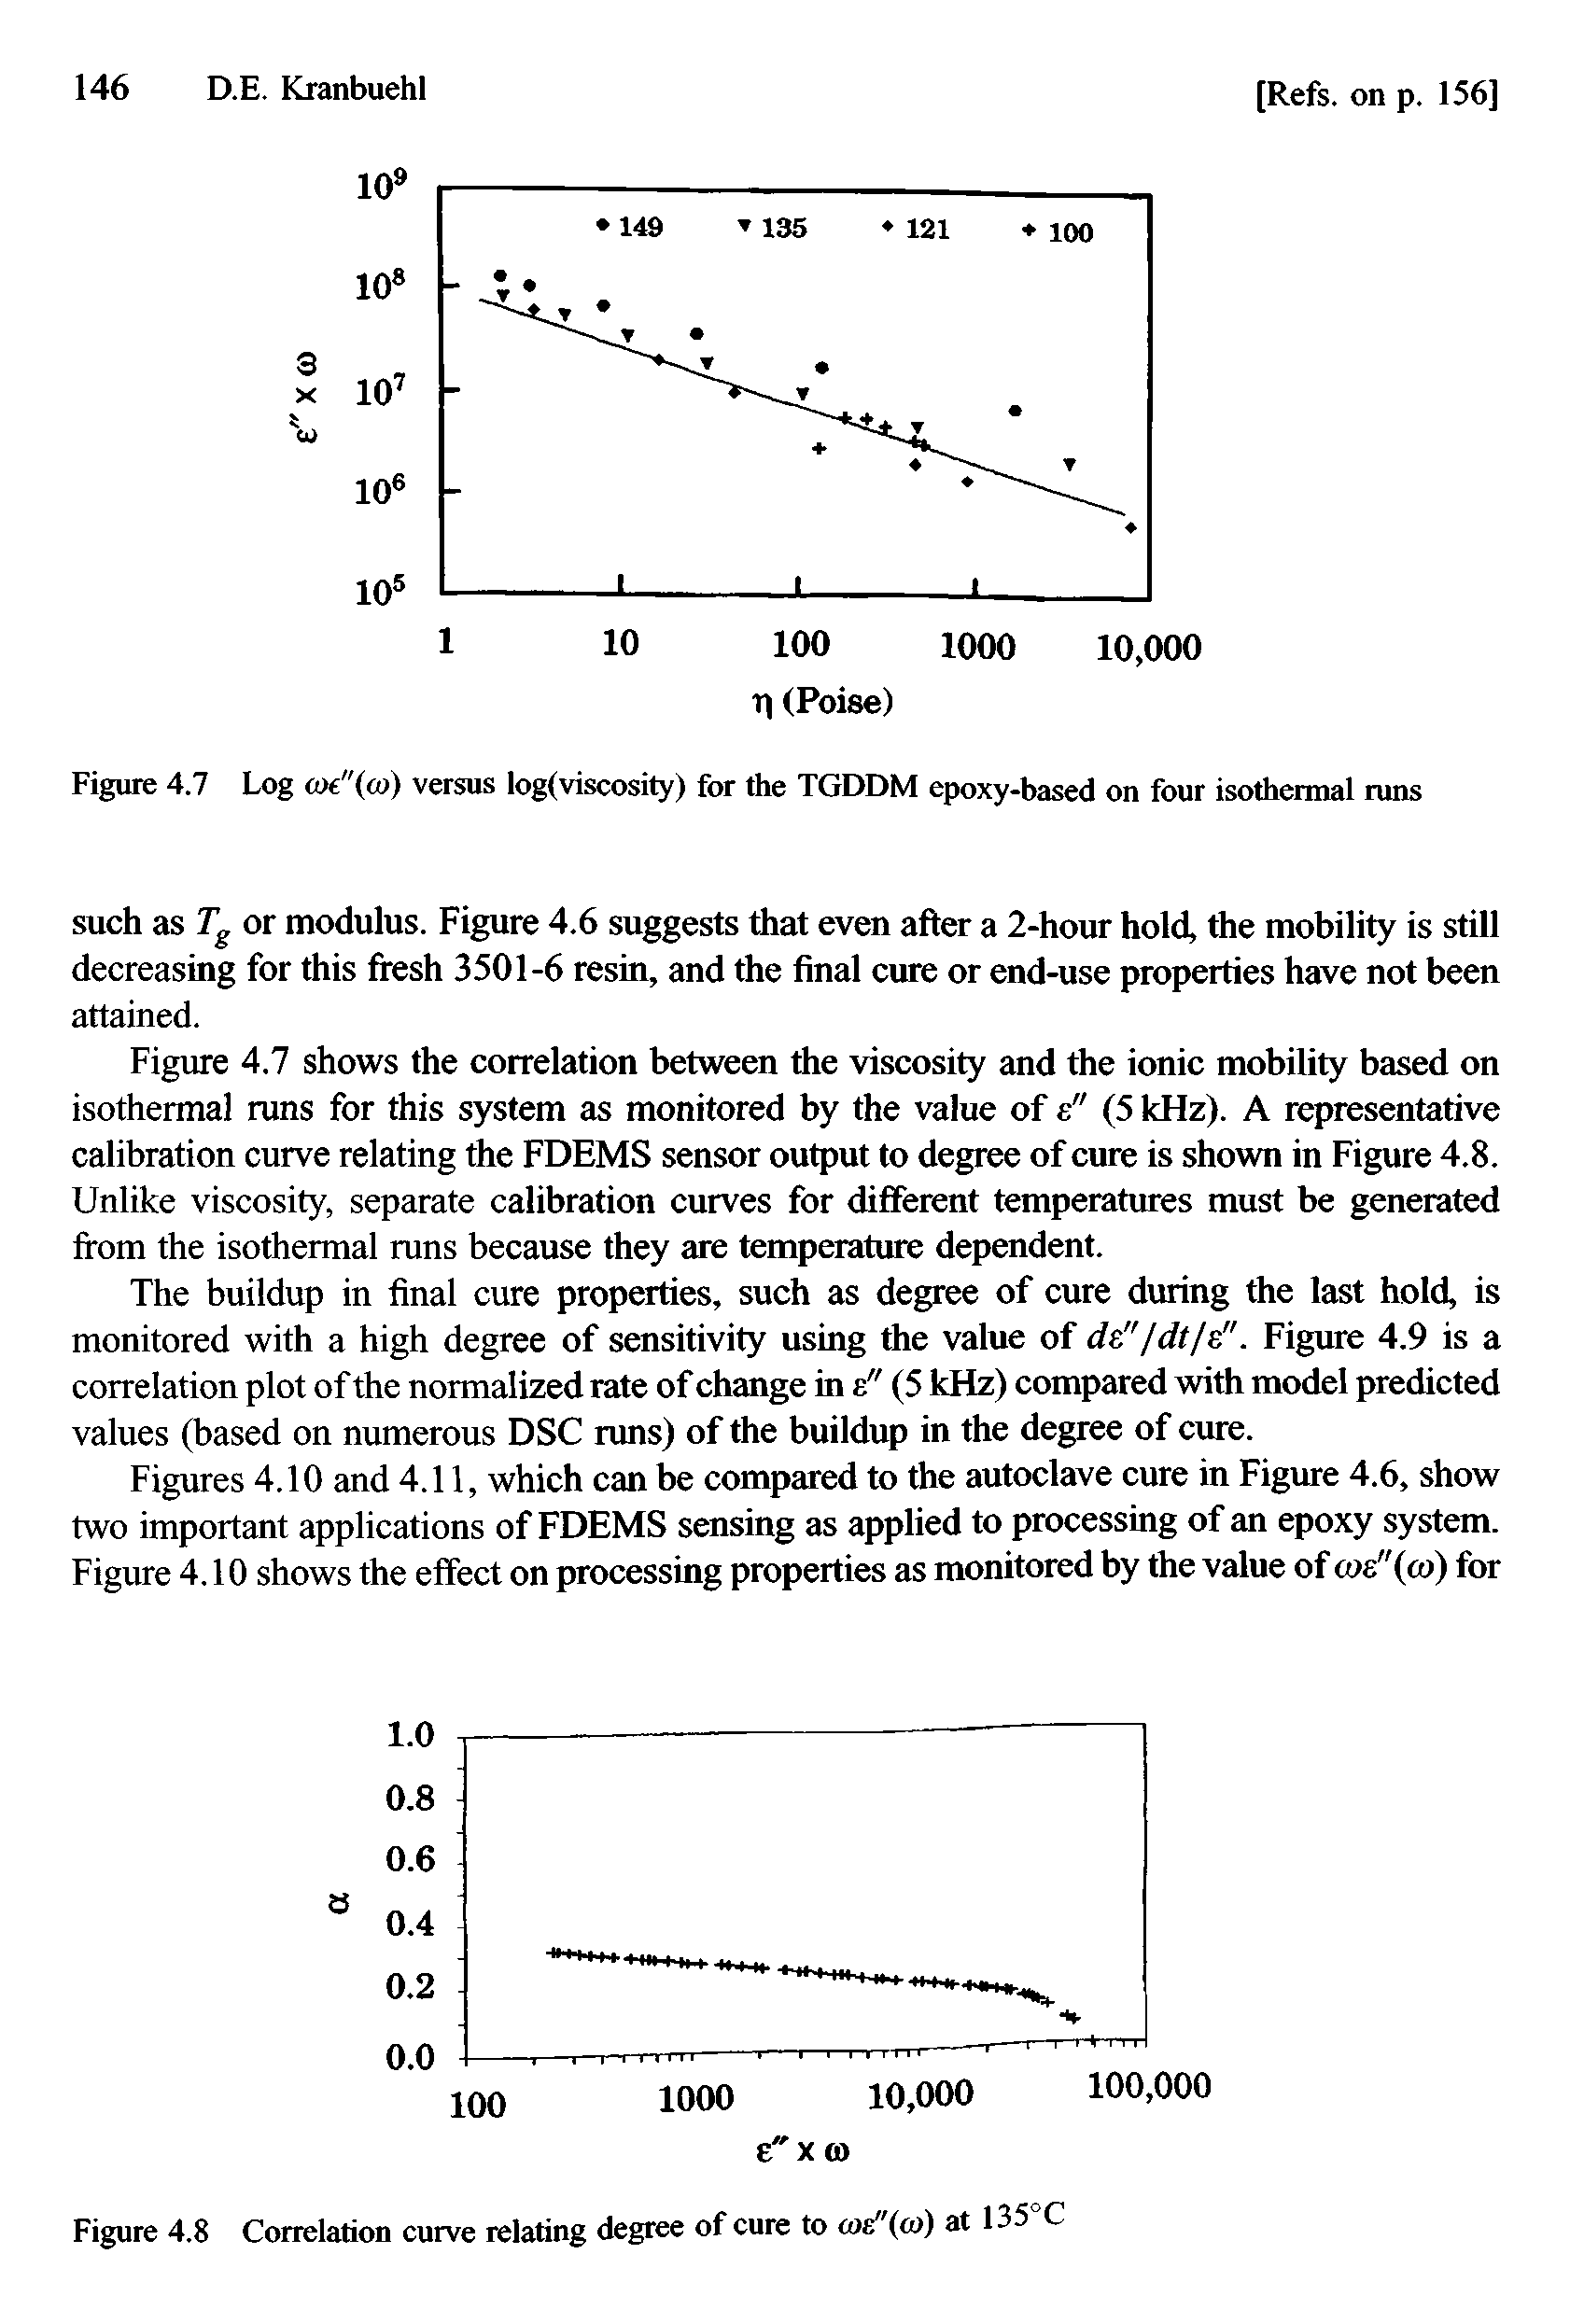 Figure 4.7 shows the correlation between the viscosity and the ionic mobility based on isothermal runs for this system as monitored by the value of e" (5 kHz). A representative calibration curve relating the FDEMS sensor output to degree of cure is shown in Figure 4.8. Unlike viscosity, separate calibration curves for different temperatures must be generated from the isothermal runs because they are temperature dependent.